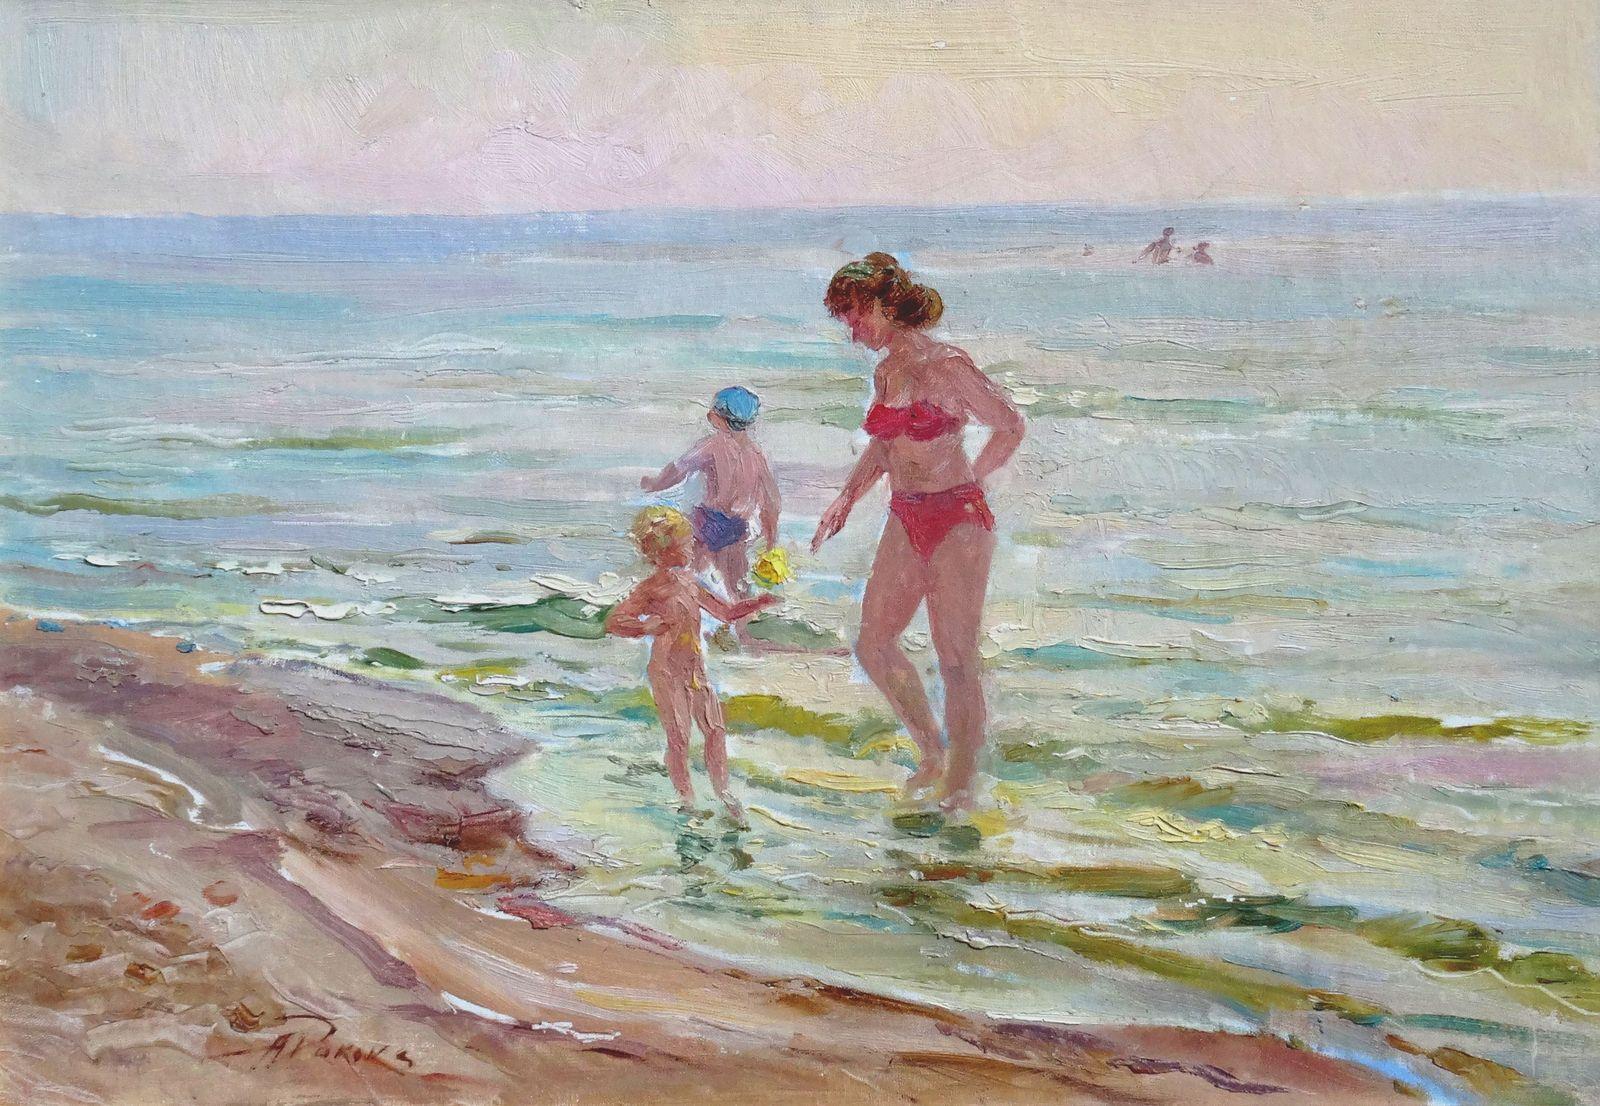 Arnolds Pankoks Landscape Painting - The beach. Oil on canvas and board, 35x50 cm